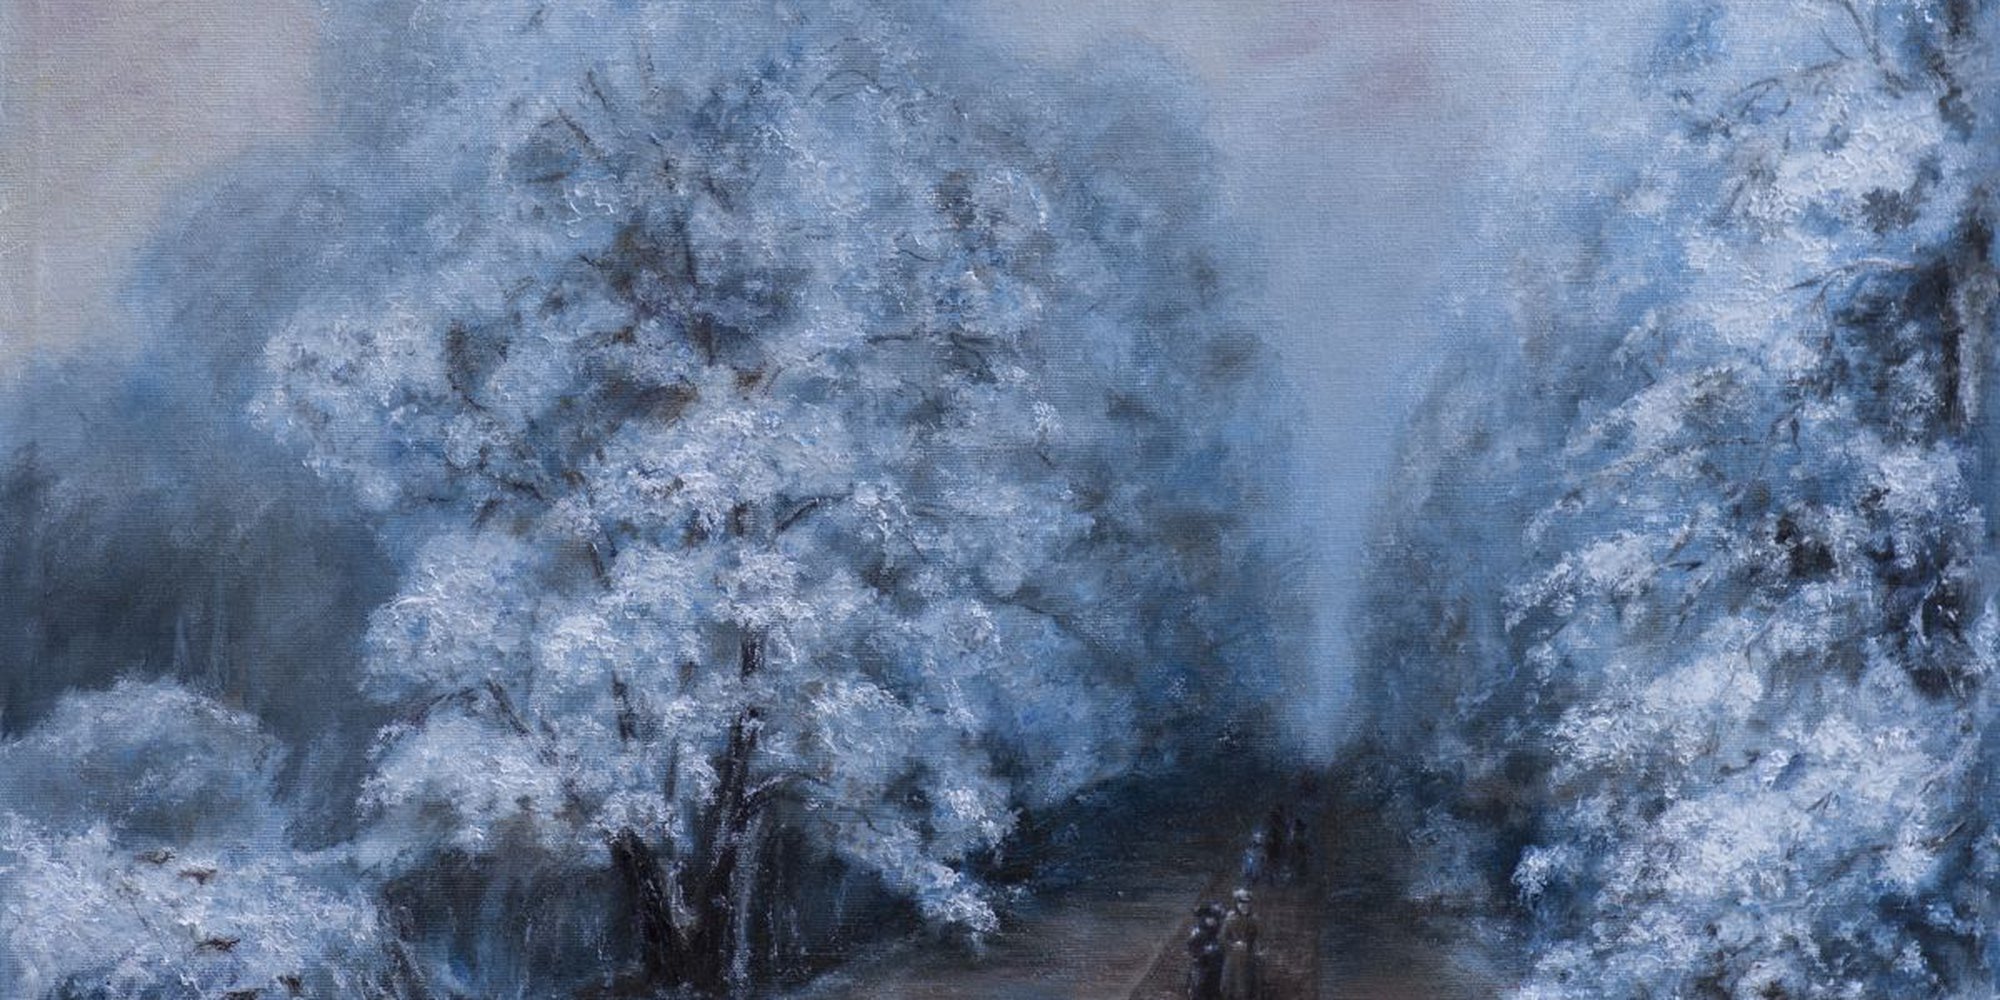 Art of the Day: "Winter Park inspired by Ivan Aivazovsky, 2016" by Mila Moroko